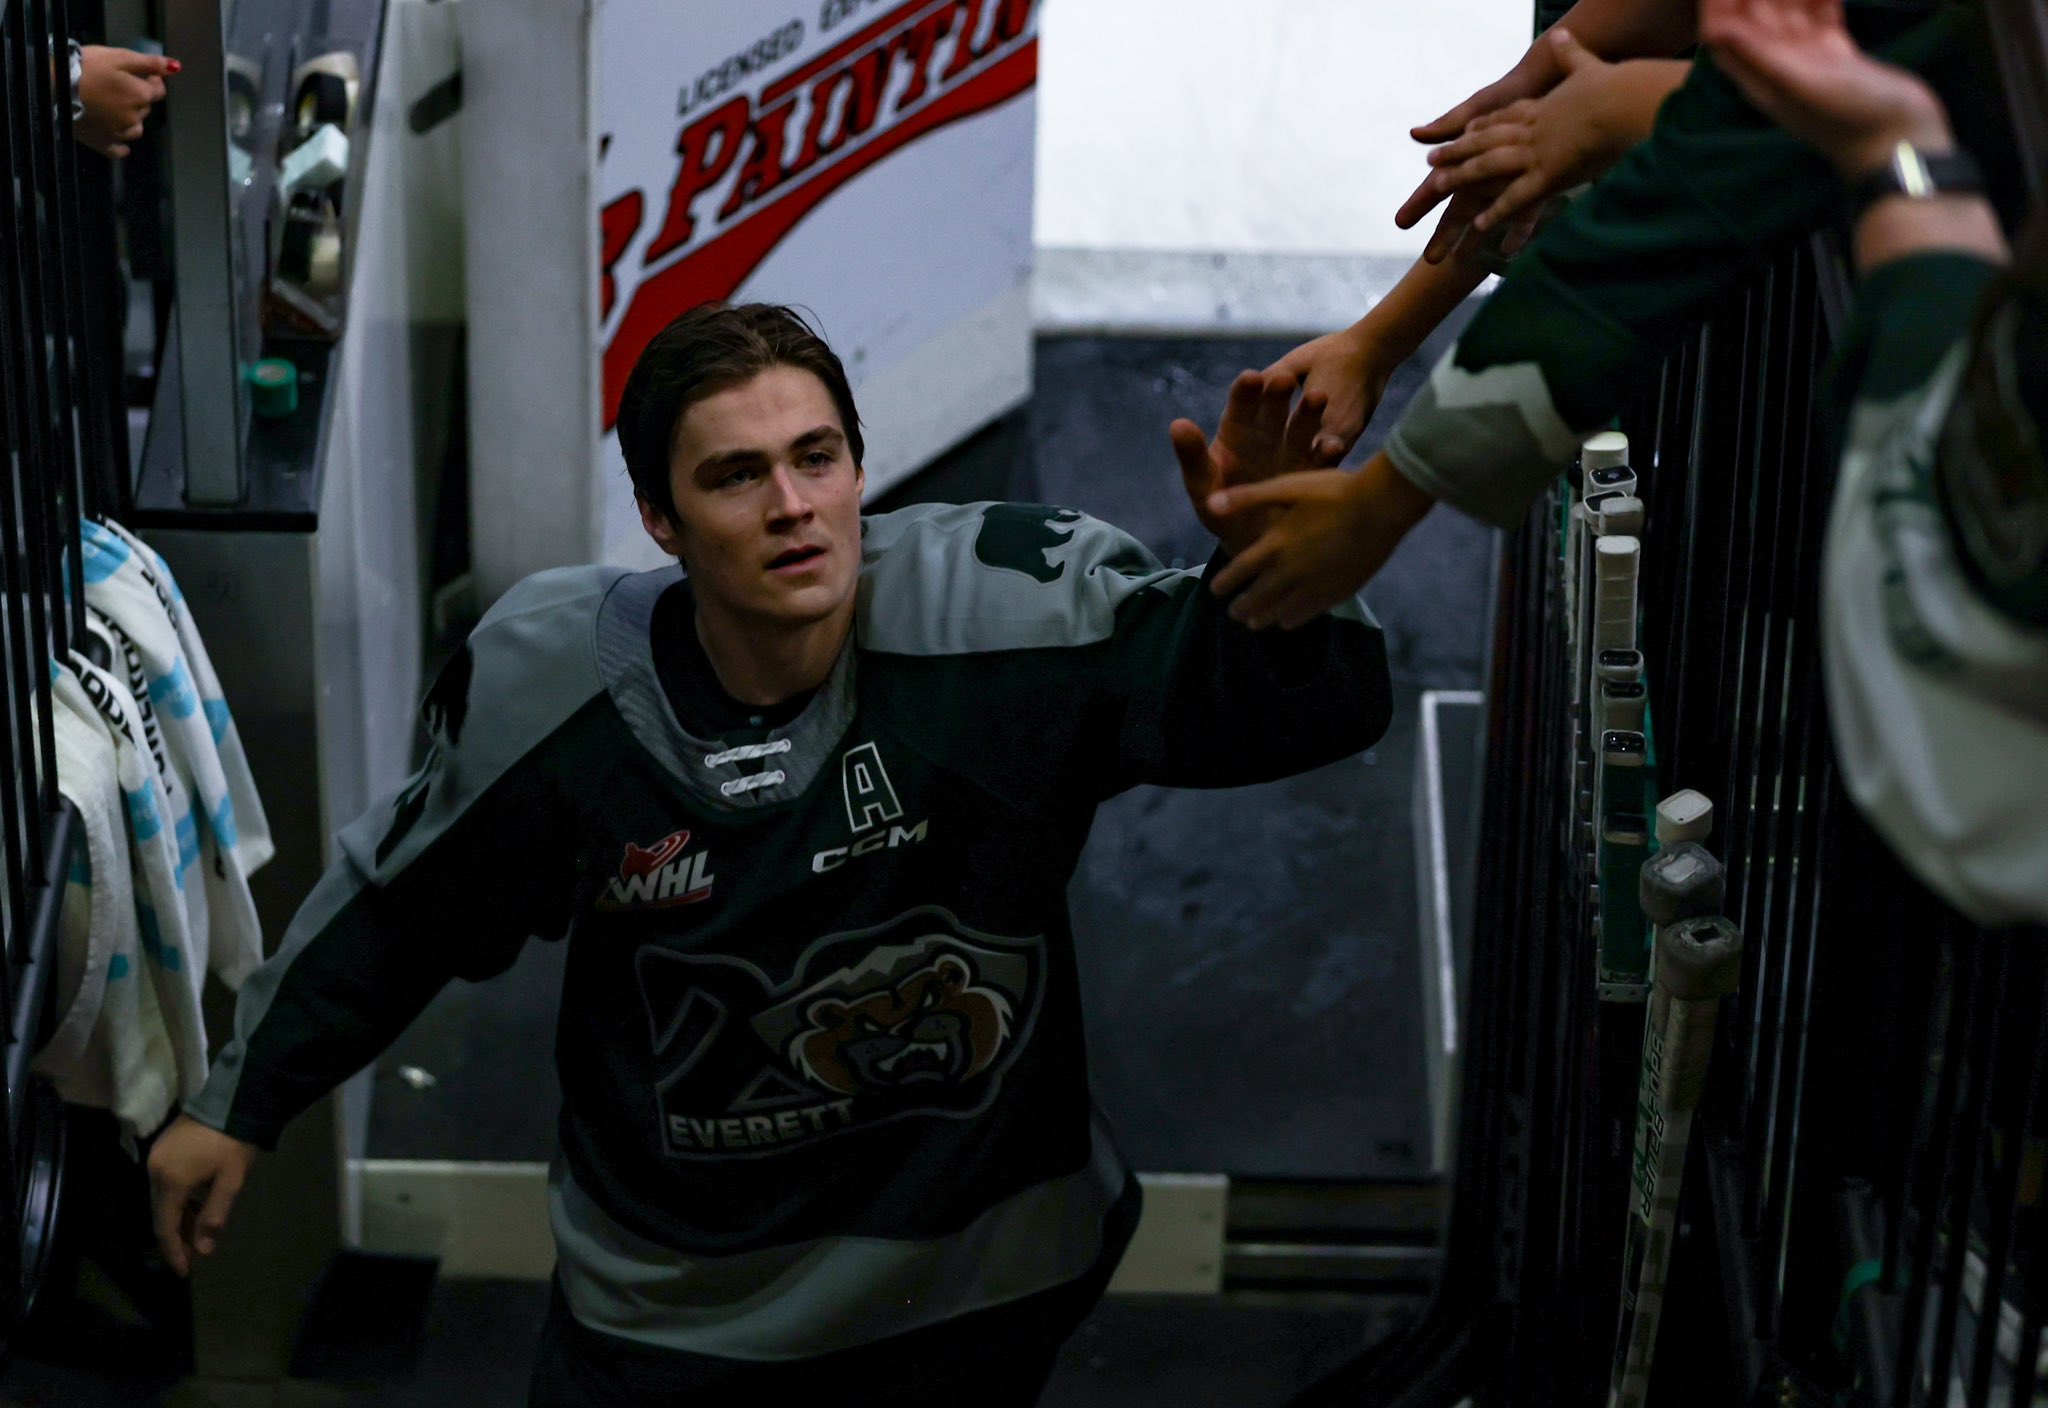 Everett Silvertips forward Austin Roest high fives some fans as he exits the ice